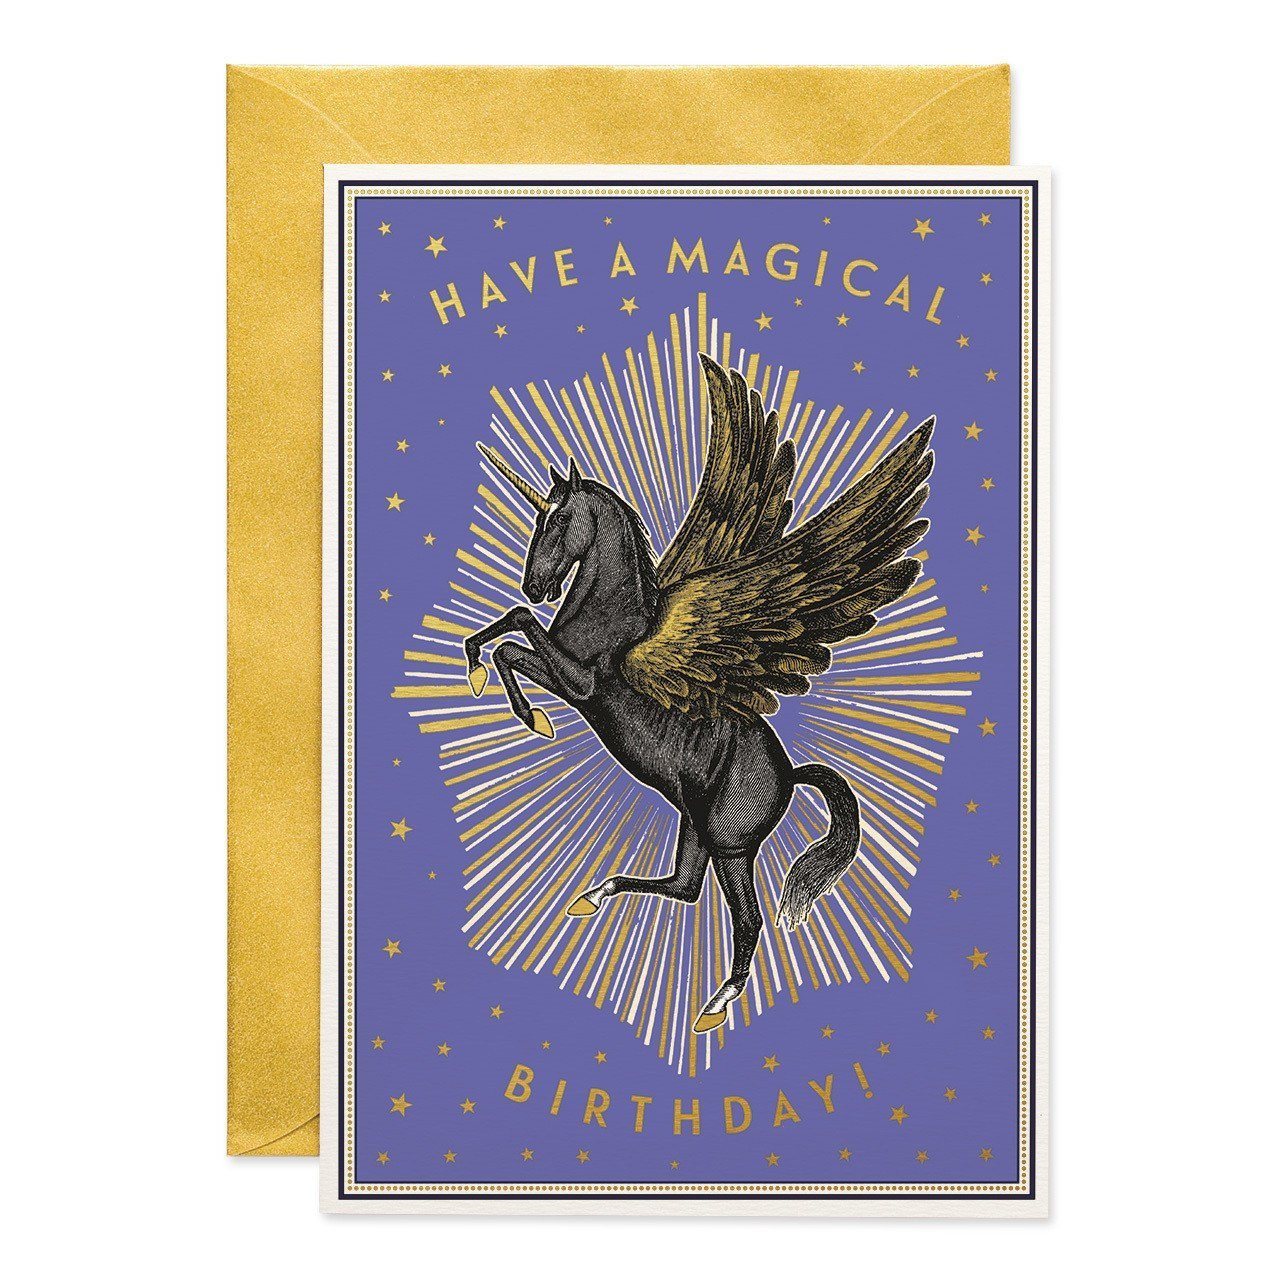 Have a Magical Birthday greeting card - Chase and Wonder - Proudly Made in Britain